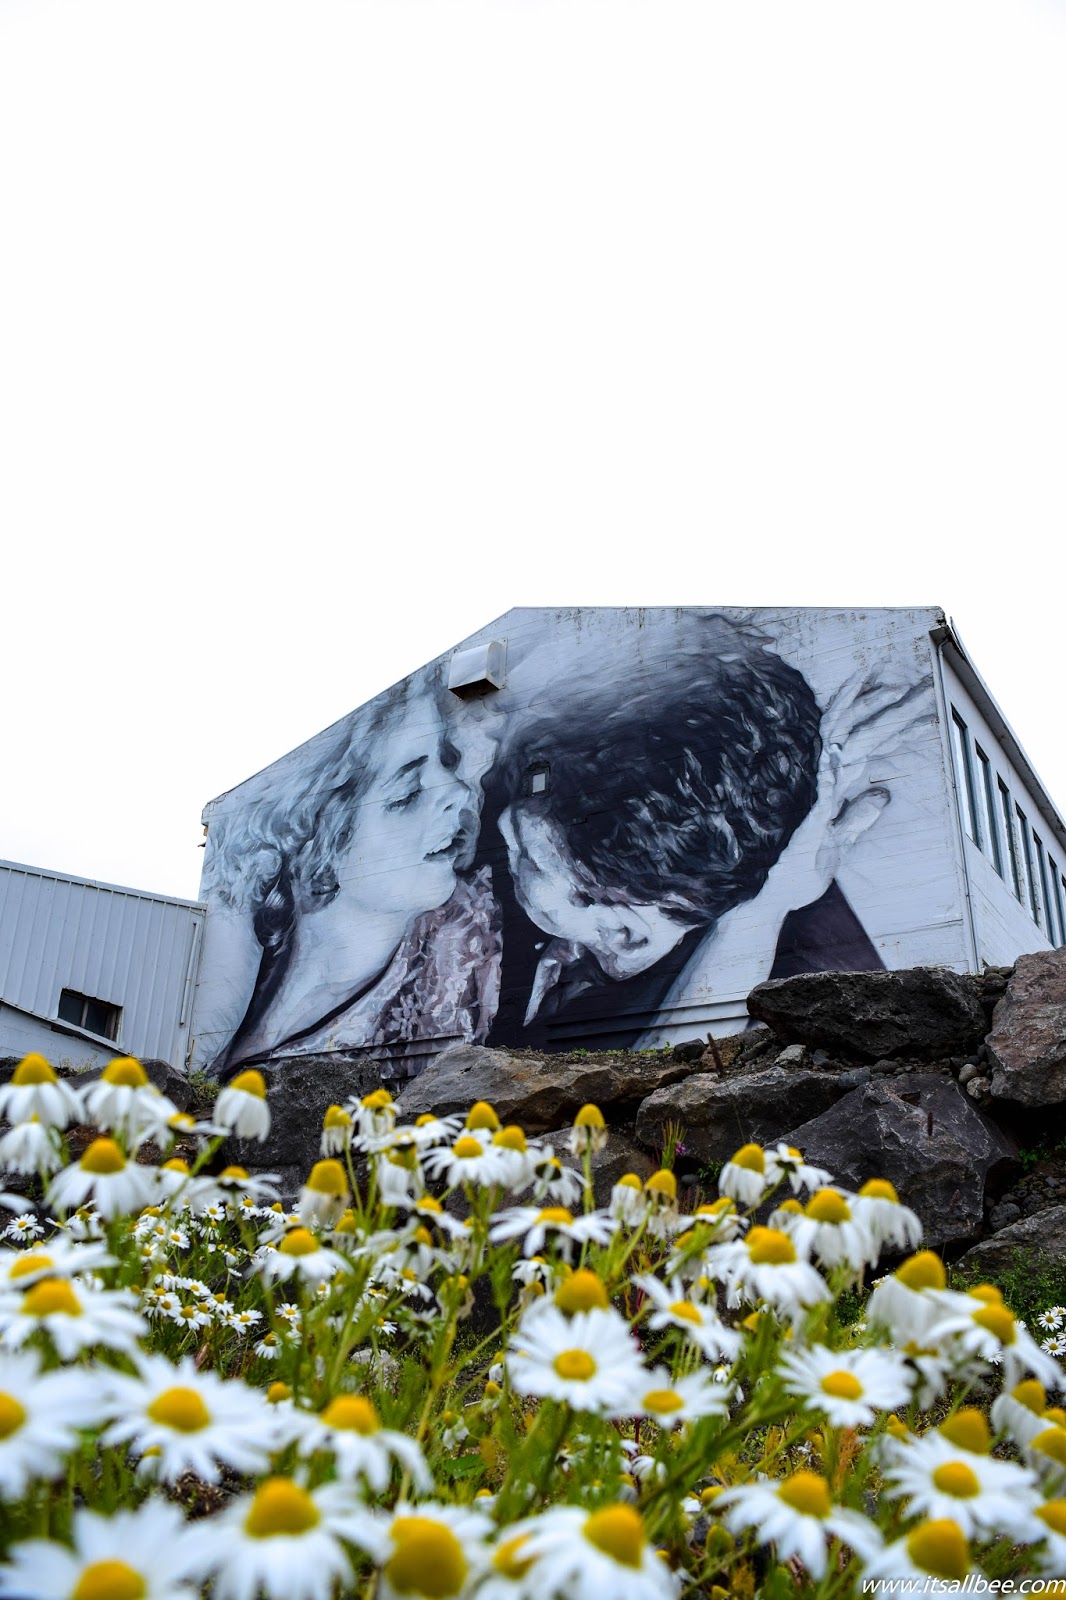 Iceland Street Art| A Colourful Side of Iceland You Need To Check Out